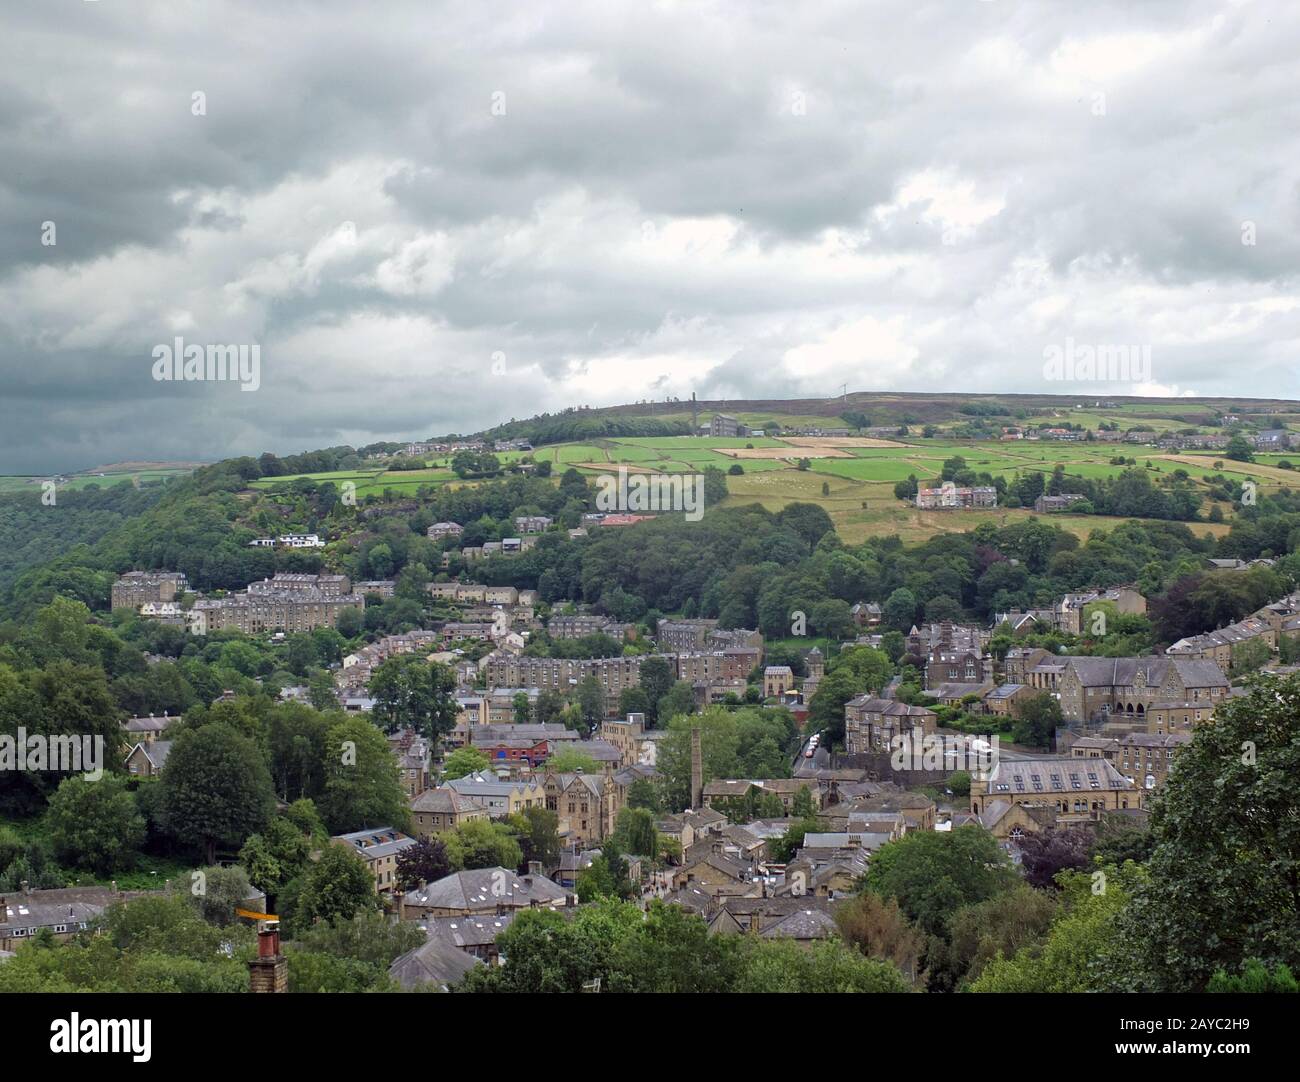 an aerial view of the town of hebden bridge in west yorkshire surrounded by pennine hills and fields Stock Photo